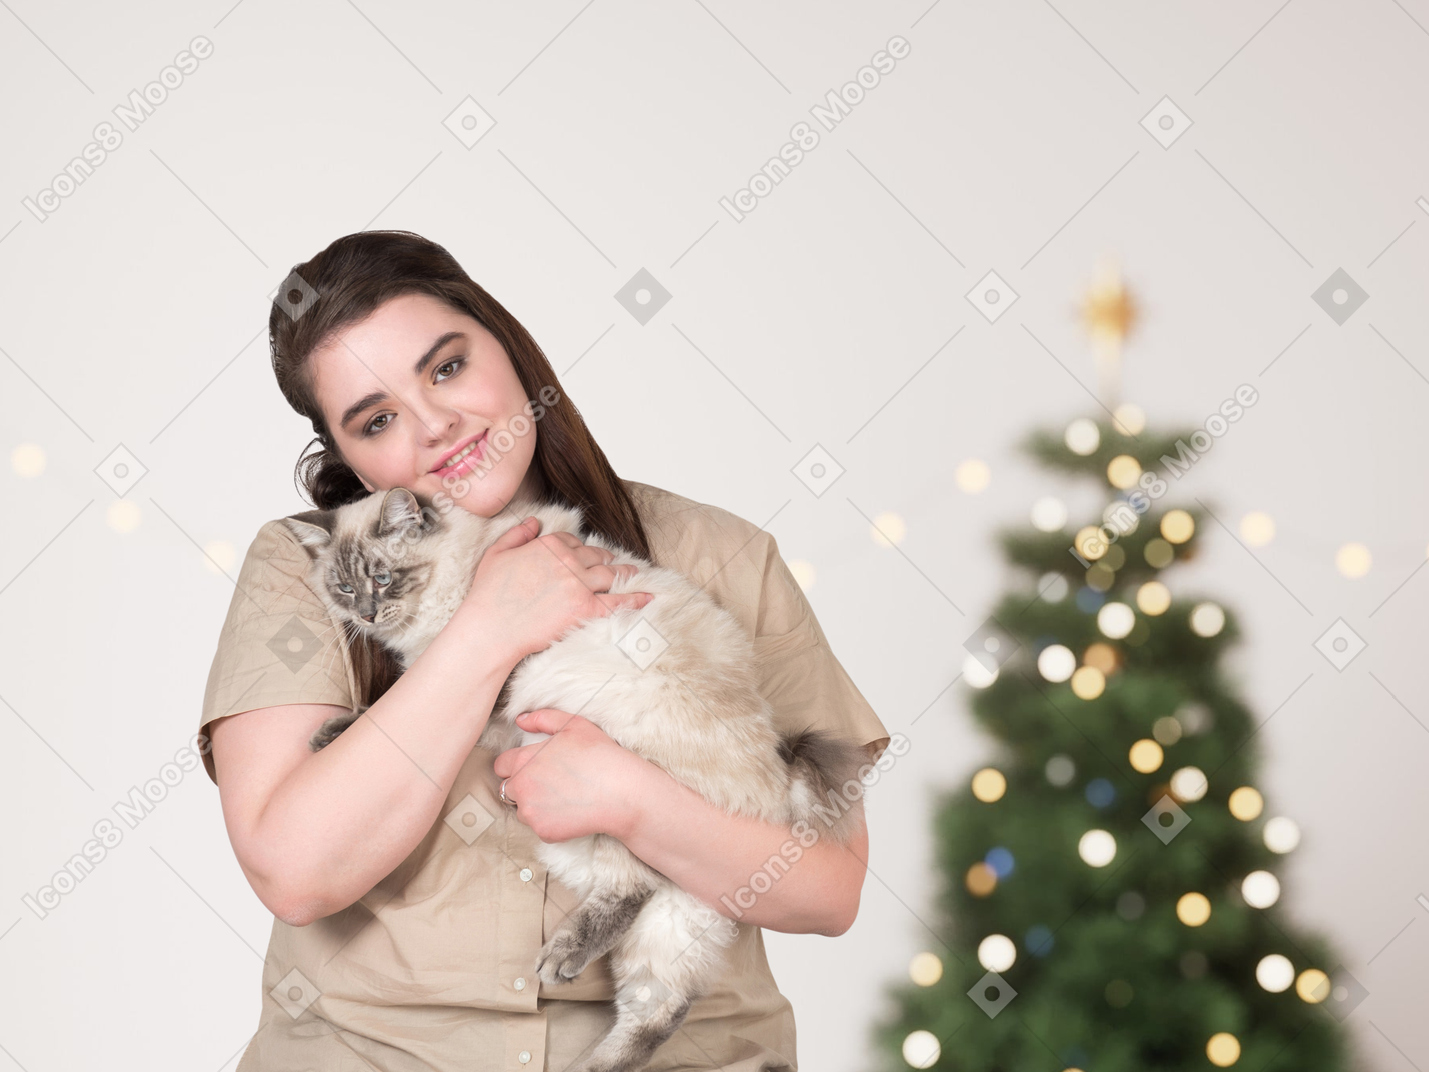 Plump woman celebrating christmas with her cat